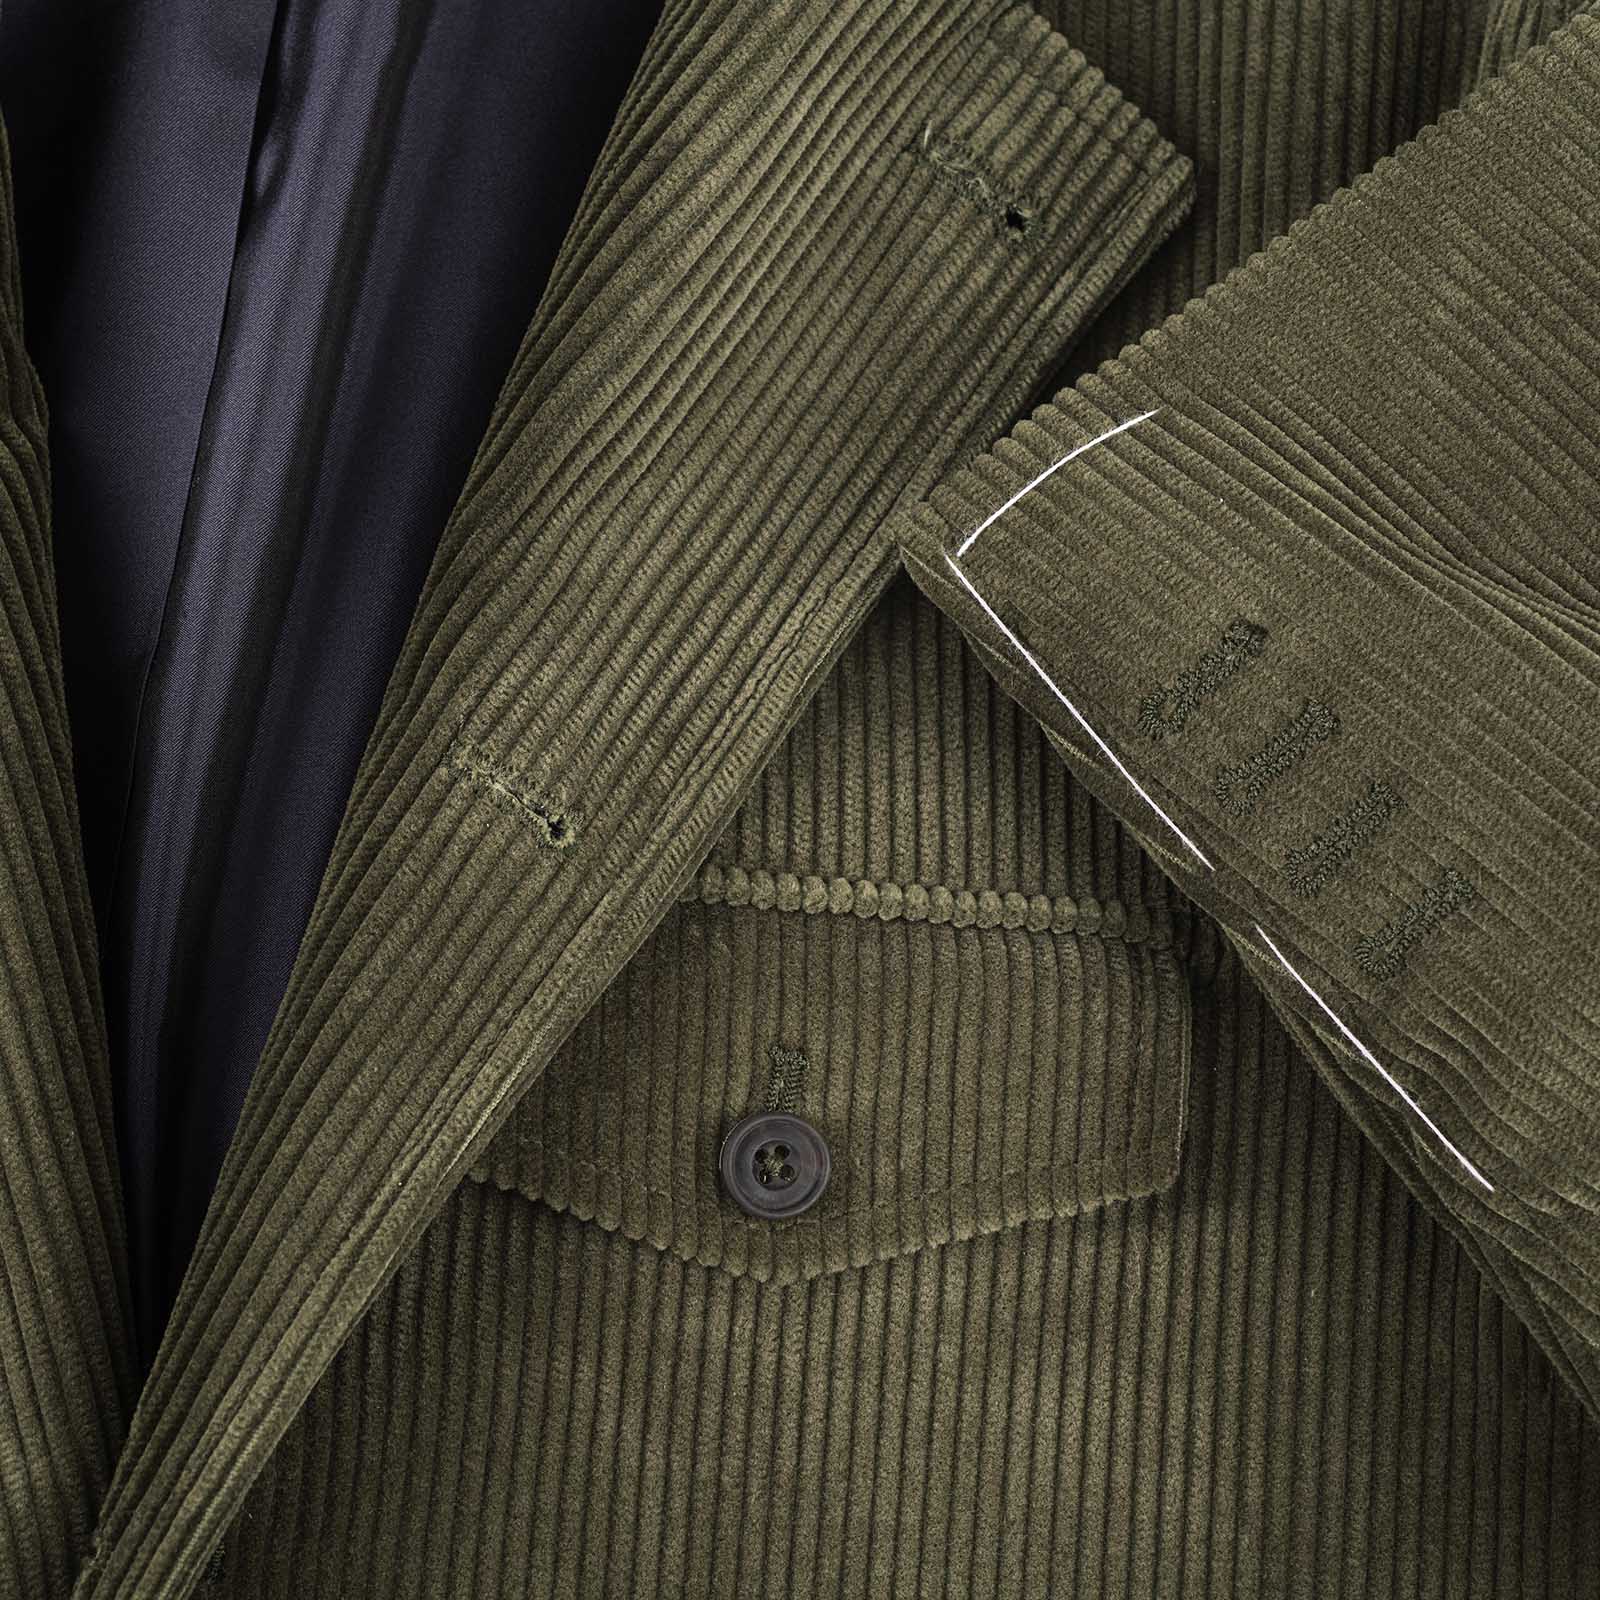 Mariano Rubinacci - Suit carrier in military green canvas